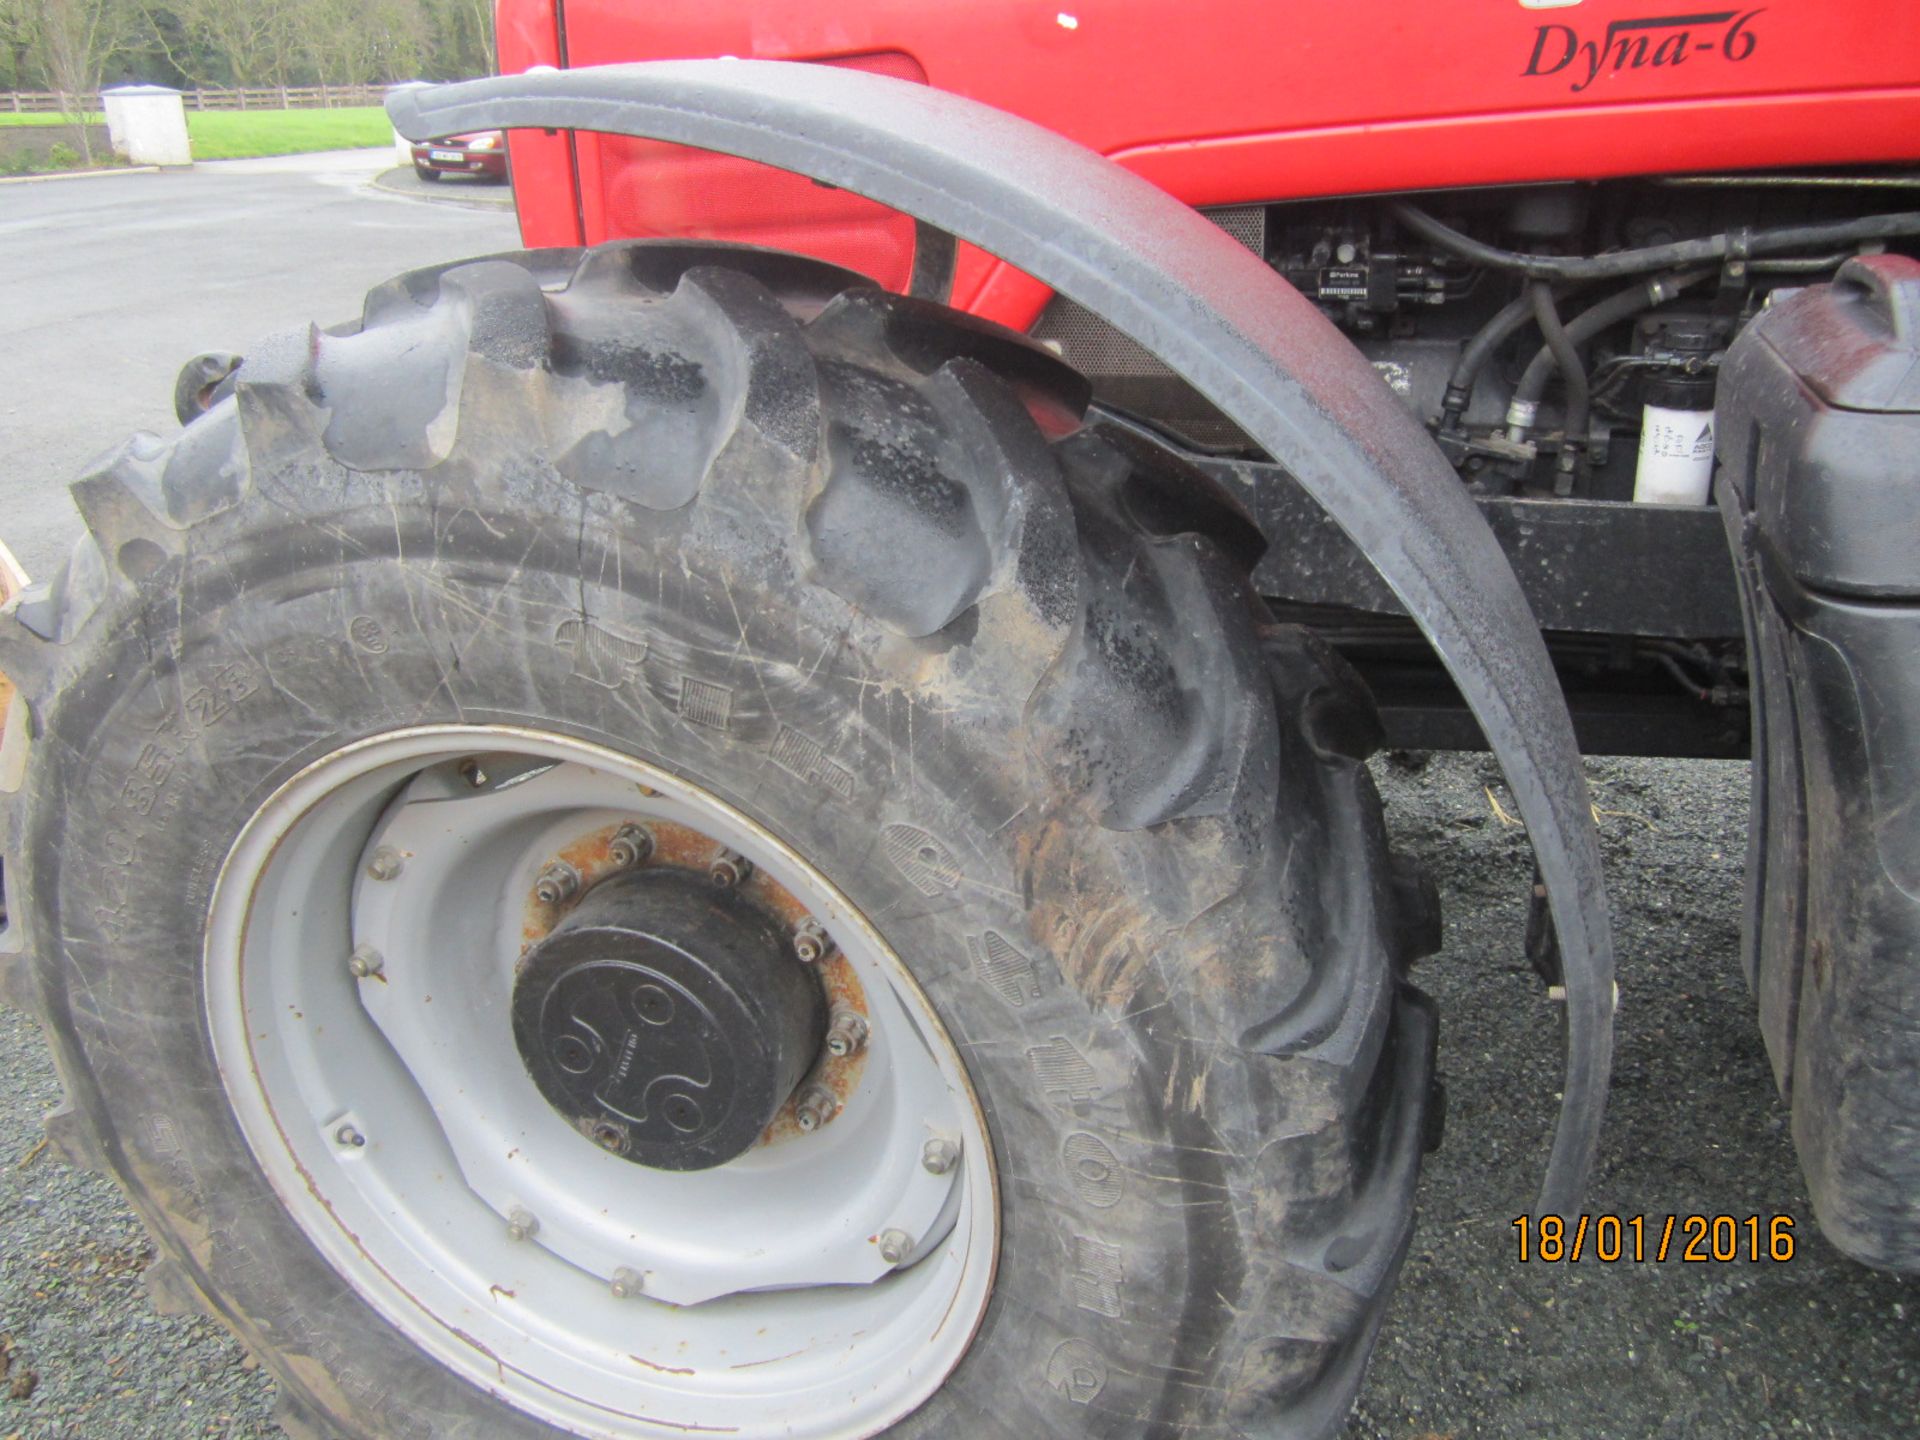 2006 Massey Ferguson 6480 DYNA 6 4WD Tractor c/w 8,300 Hrs - Image 7 of 7